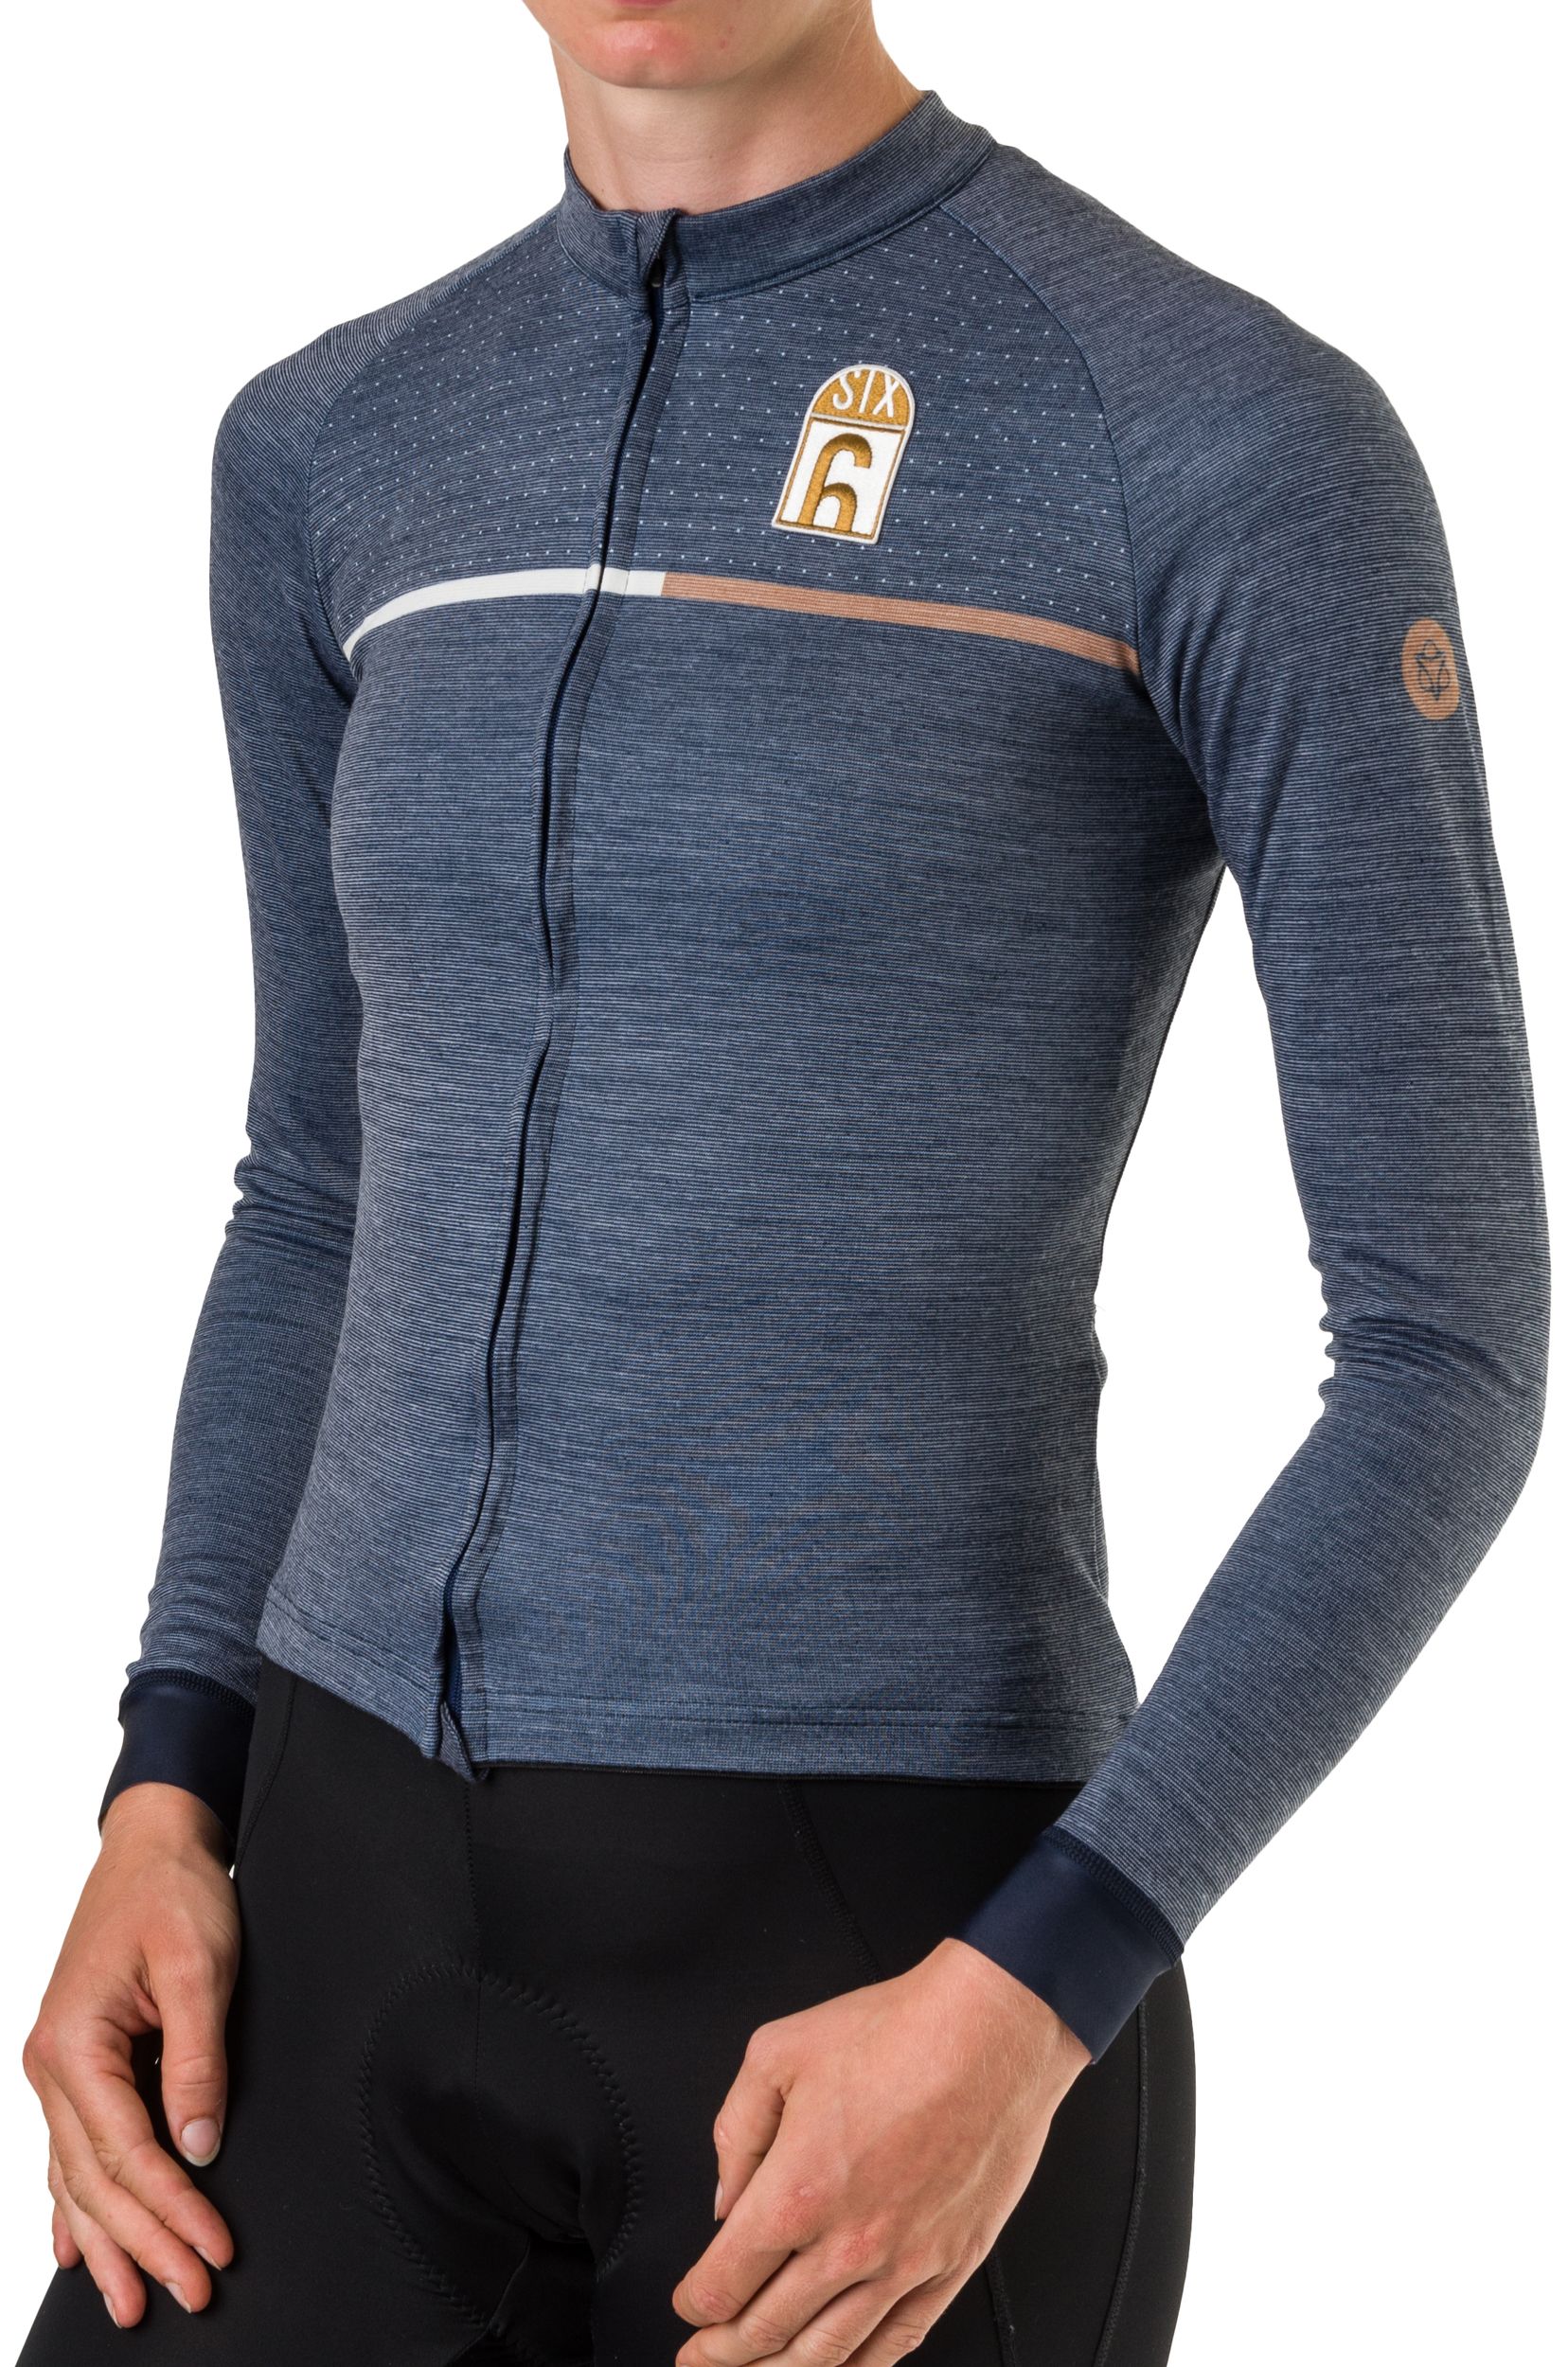 Merino Maillot M/L SIX6 Mujeres fit example